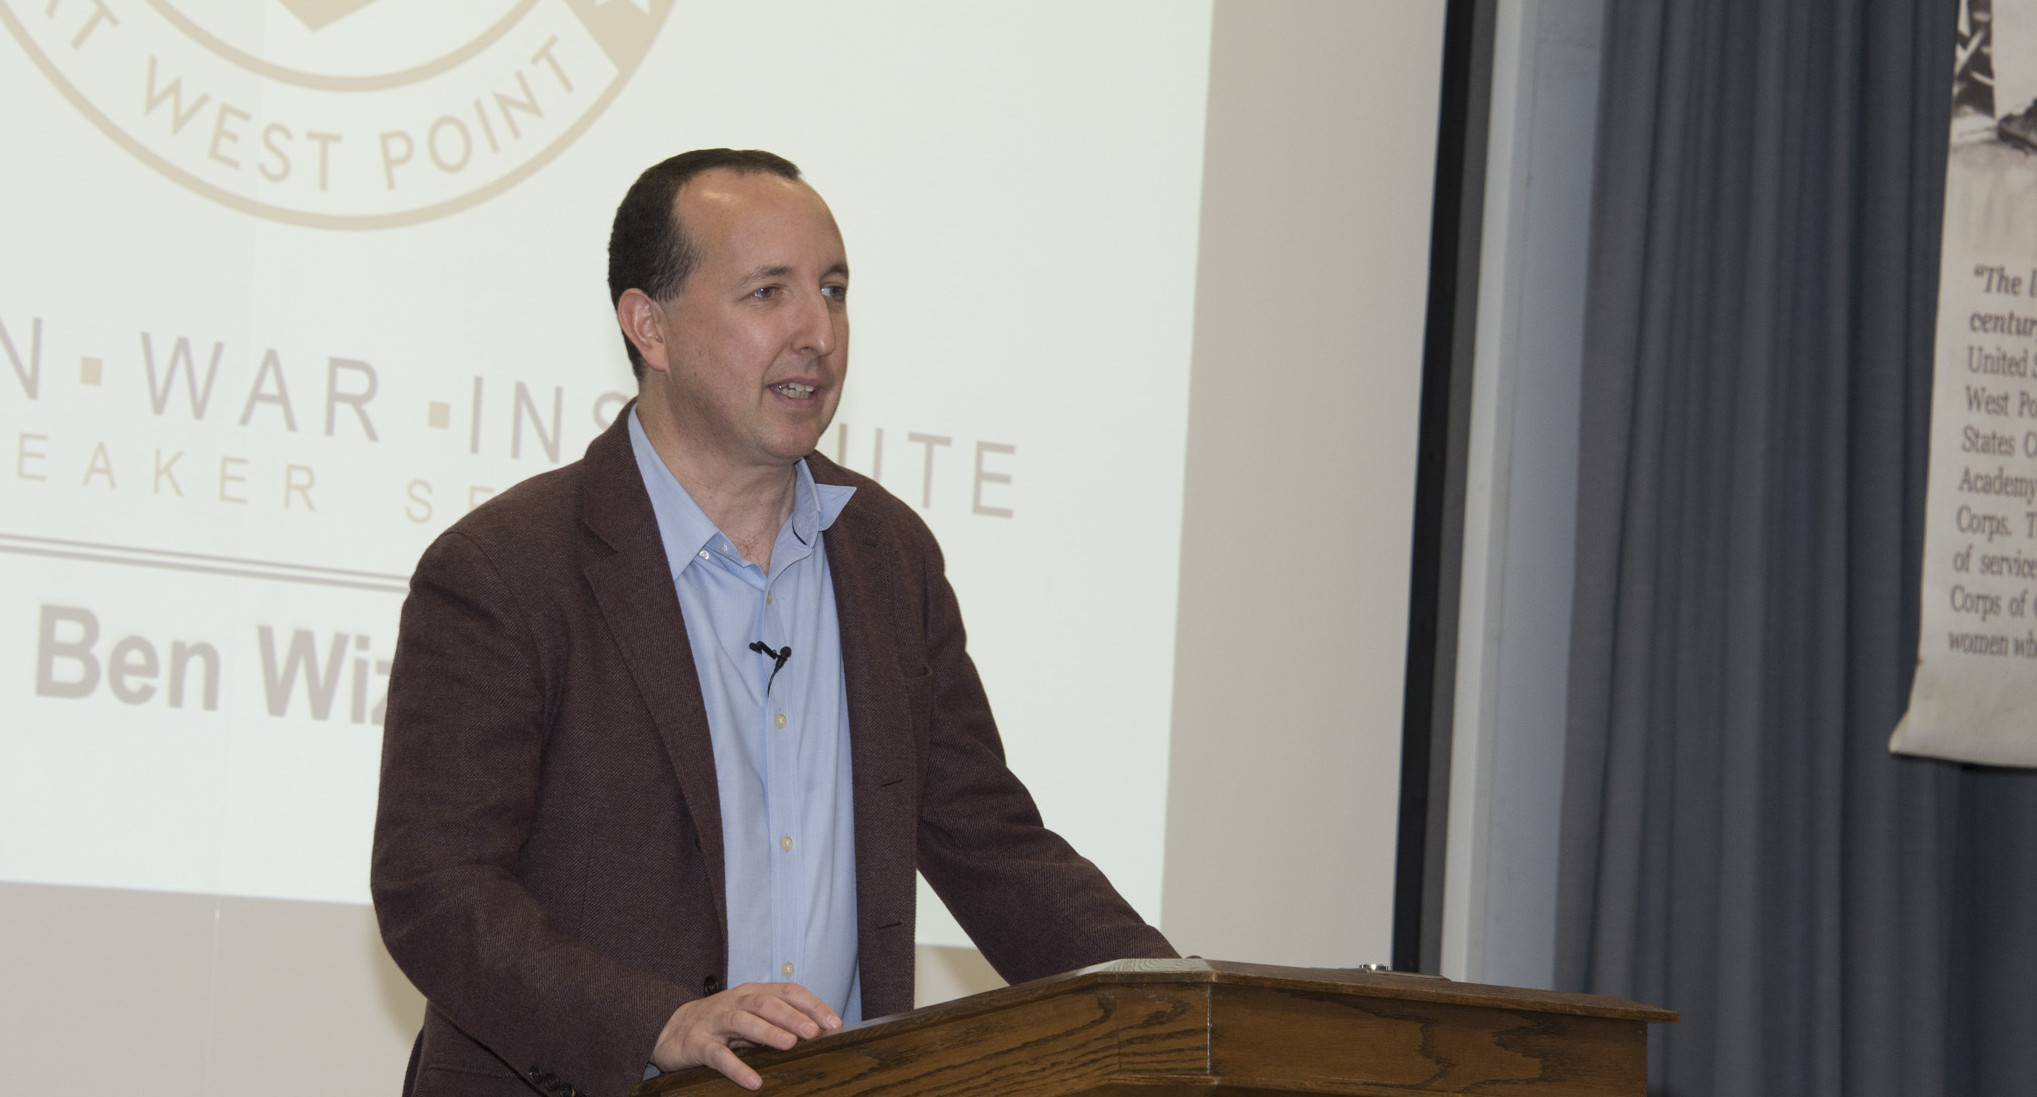 MWI Speaker Series – Ben Wizner: Snowden, Secrecy, and the Case for Unauthorized Leaks